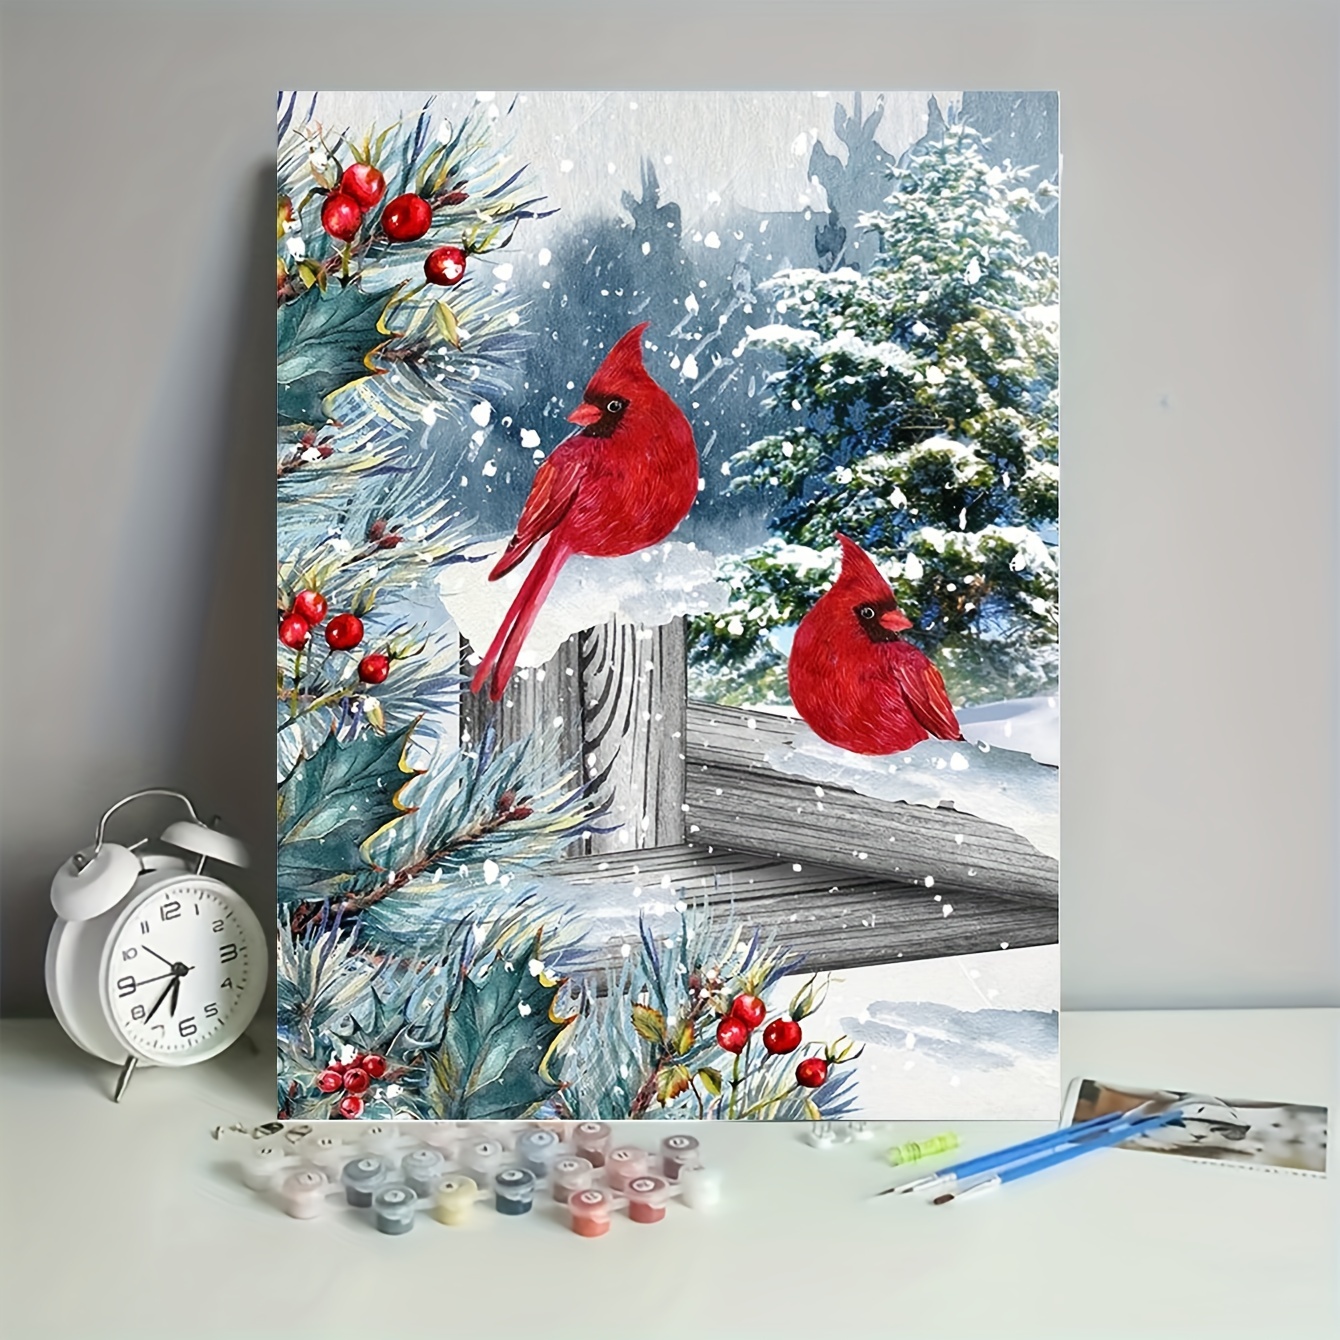 Christmas Cardinals Birds Paint by Number for Adults Beginner, DIY Easy Winter Adult Paint by Number Kits Canvas, with 3 Brushes and Acrylic Paint